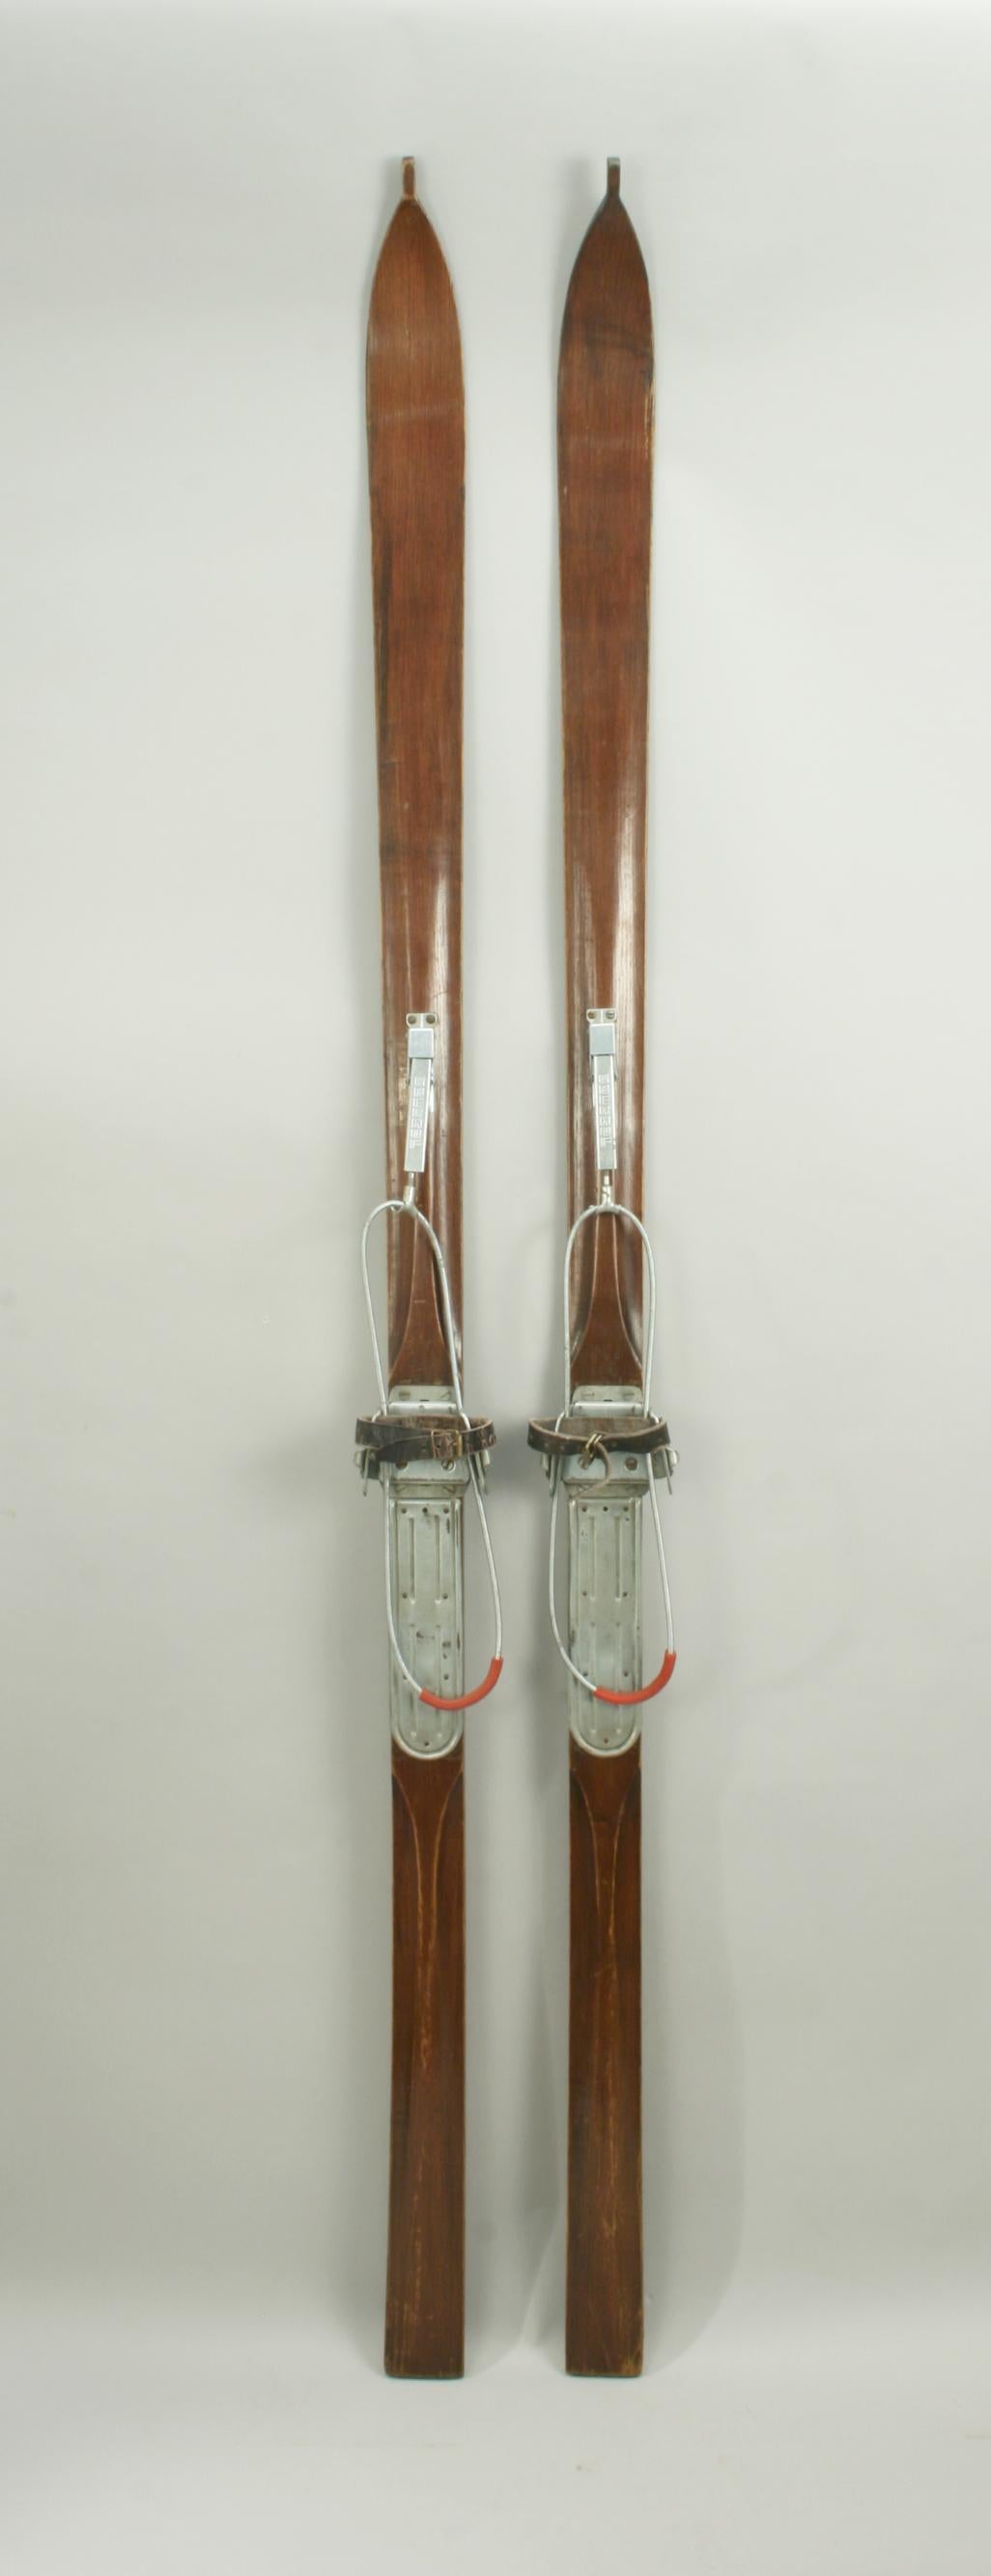 Pair of Antique Hickory / Ash Skis, Telemark Wintersport 2